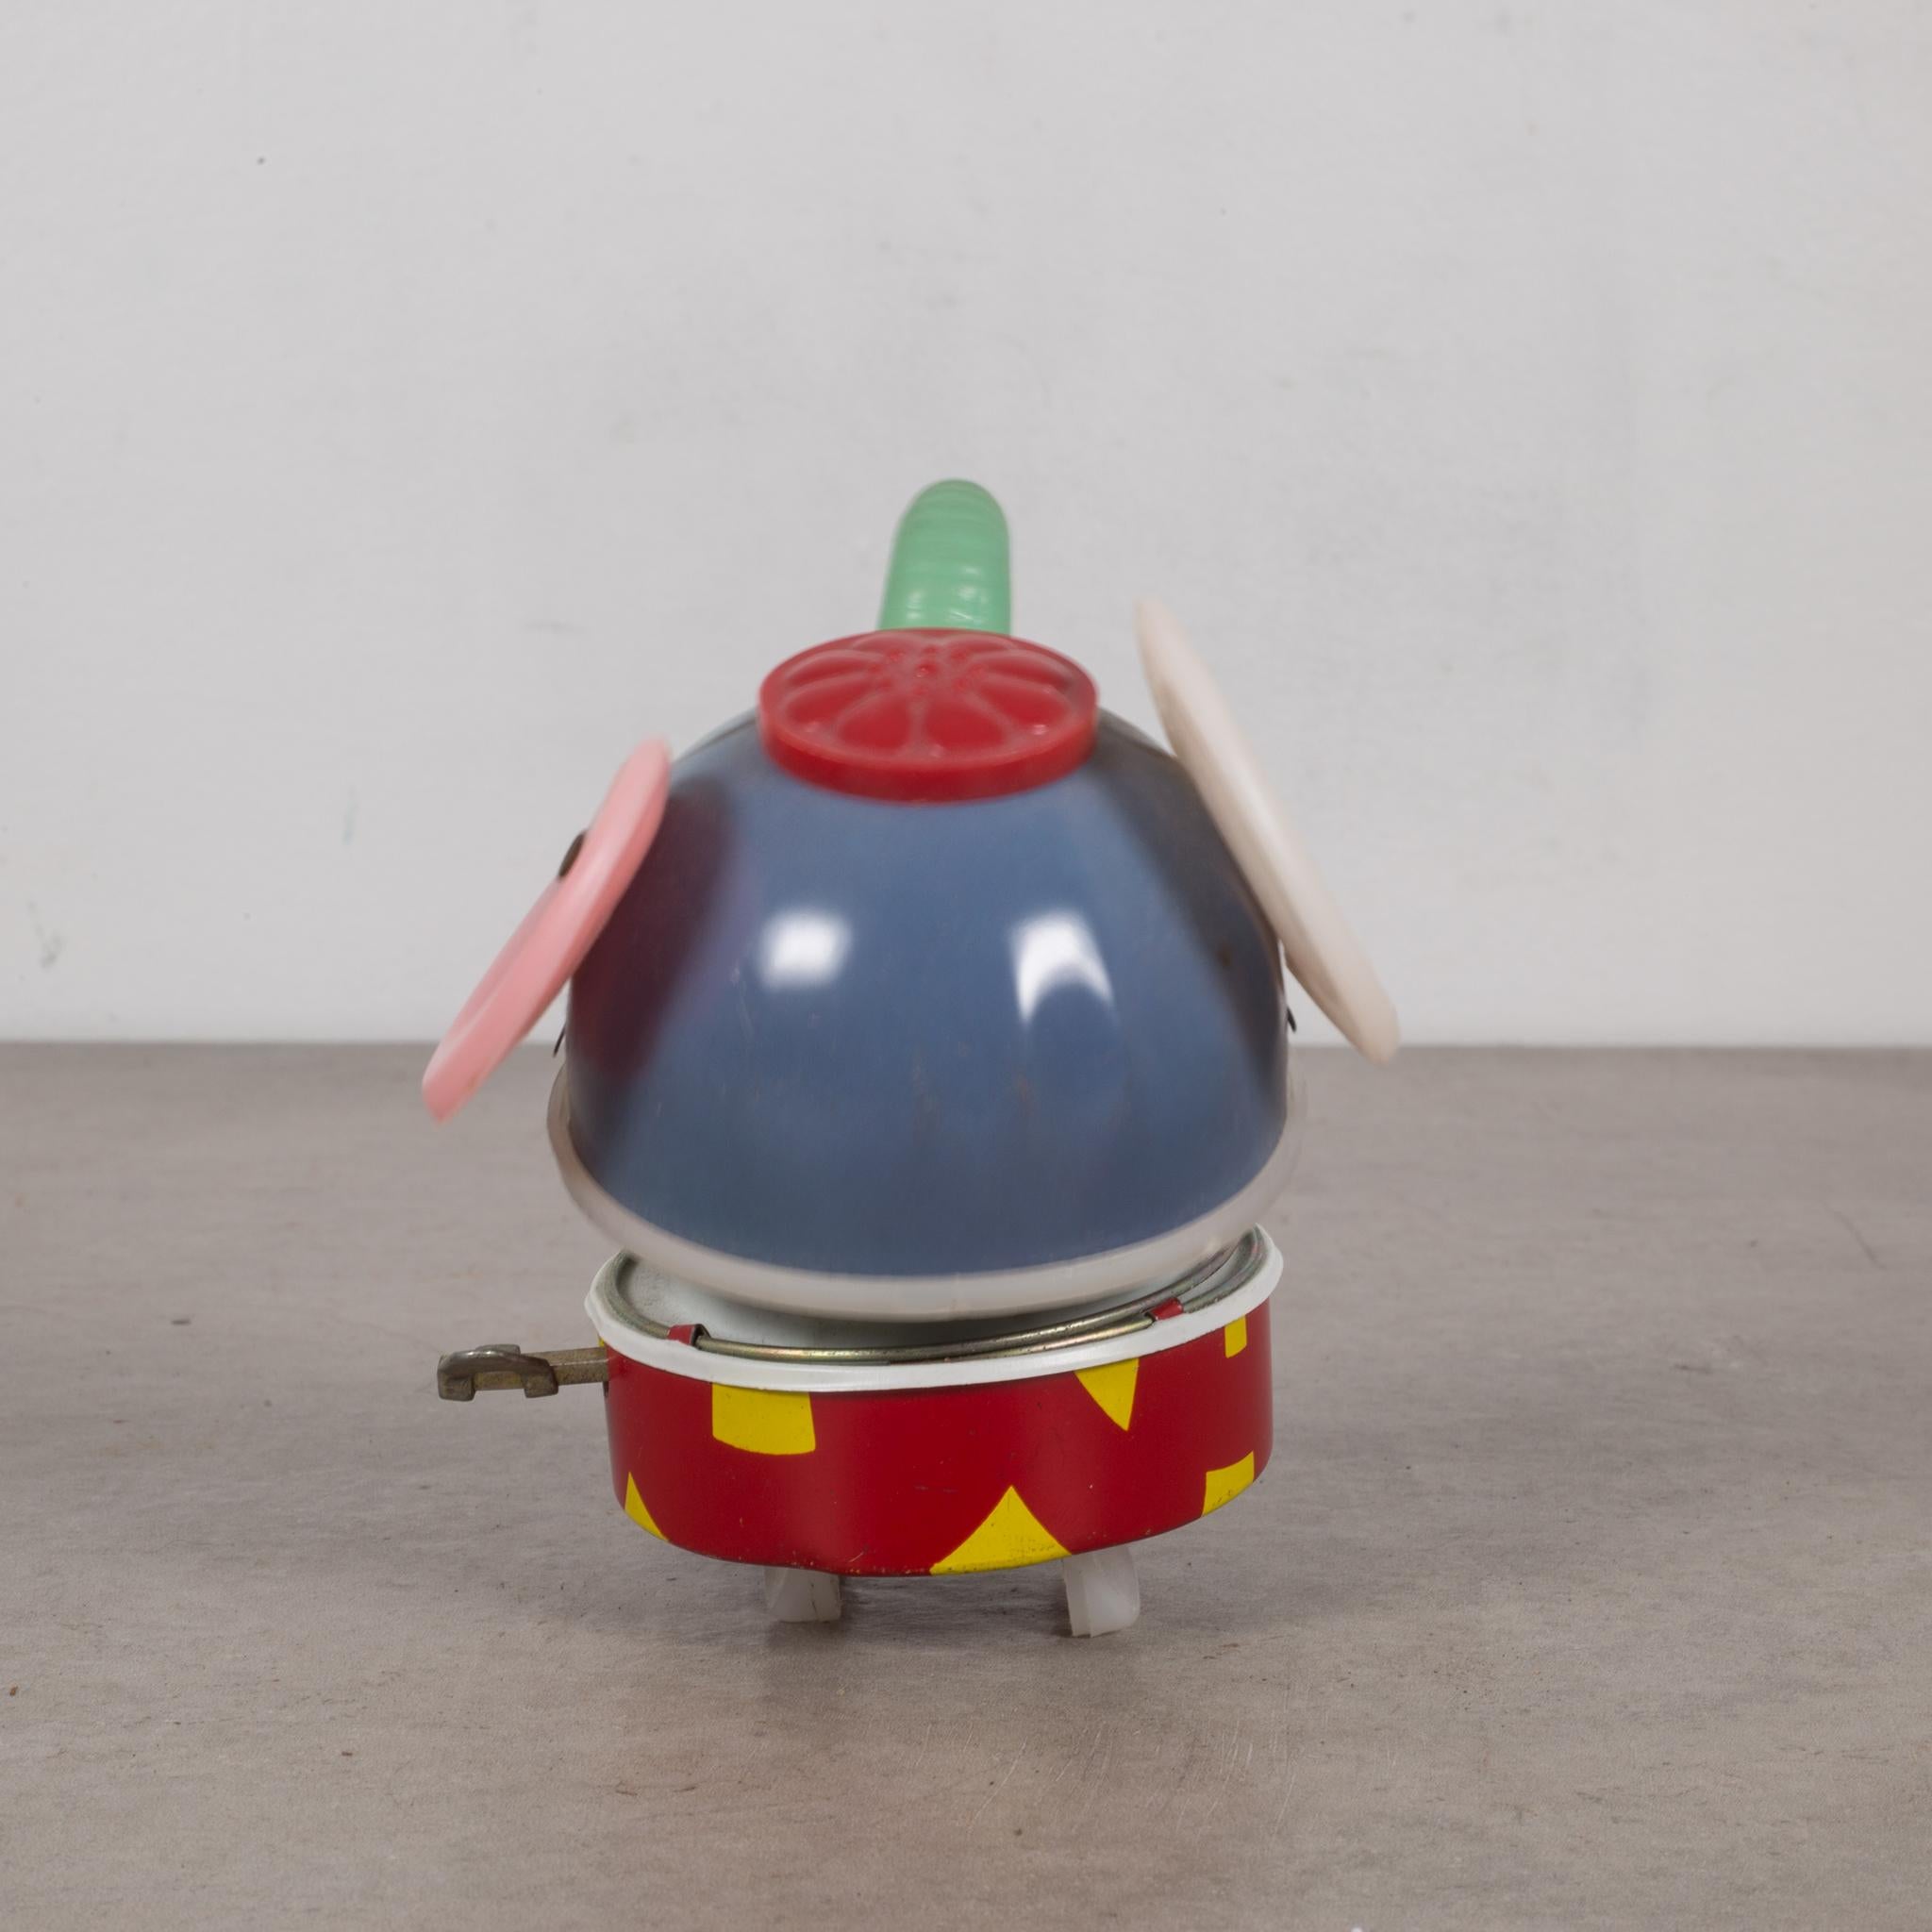 About
Charming colorful tin toy windup elephant toy with plastic ears and a soft plastic trunk. Found in Japan.
Made in China for the Japanese market.
Works well. Wind it up and watch it walk.

Creator unknown.
Materials and techniques